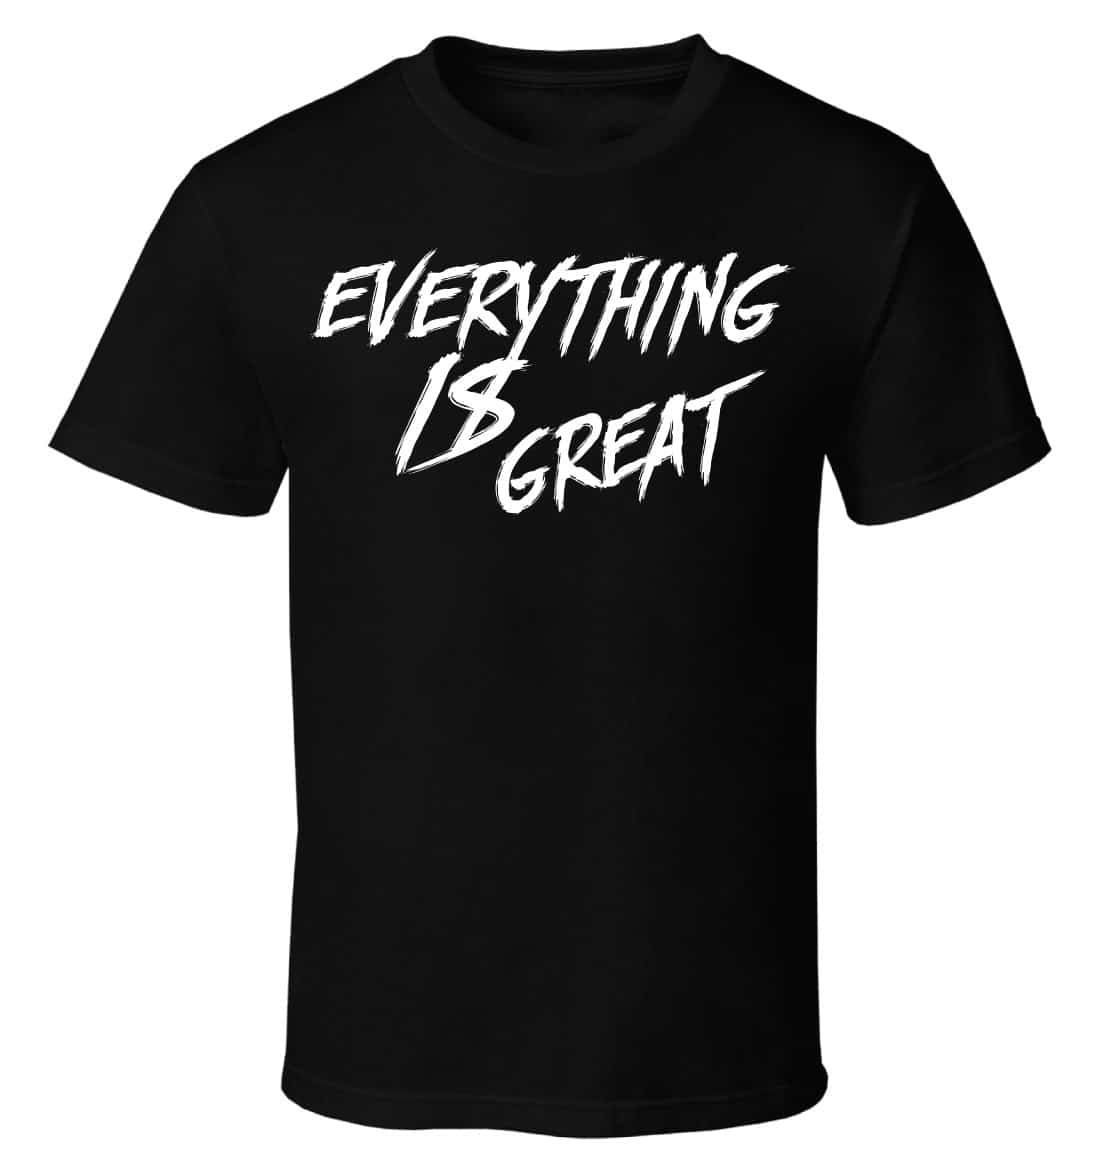 Kyle-Busch-Everything-is-Great-T-Shirt.jpg